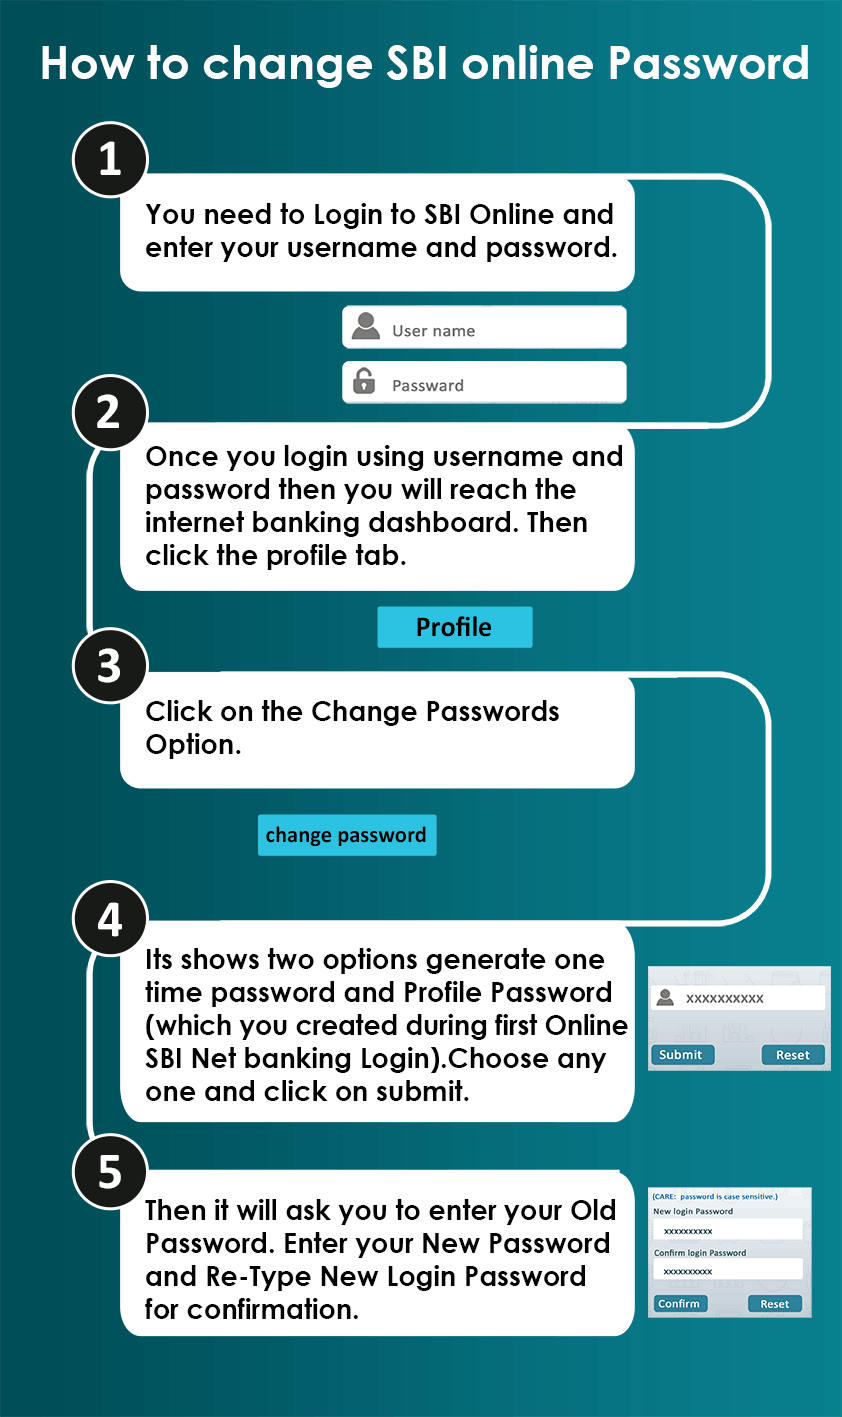 1. You need to Login to SBI Online and enter your username and password.
						2. Once you login using username and password then you will reach the internet banking dashboard. Then click the profile tab.
						3. Click on the Change Passwords Option.
						4. Its shows two options generate one time password and Profile Password (which you created during first Online SBI Net banking Login).Choose any one and click on submit.
						5. Then it will ask you to enter your Old Password. Enter your New Password and Re-Type New Login Password for confirmation.